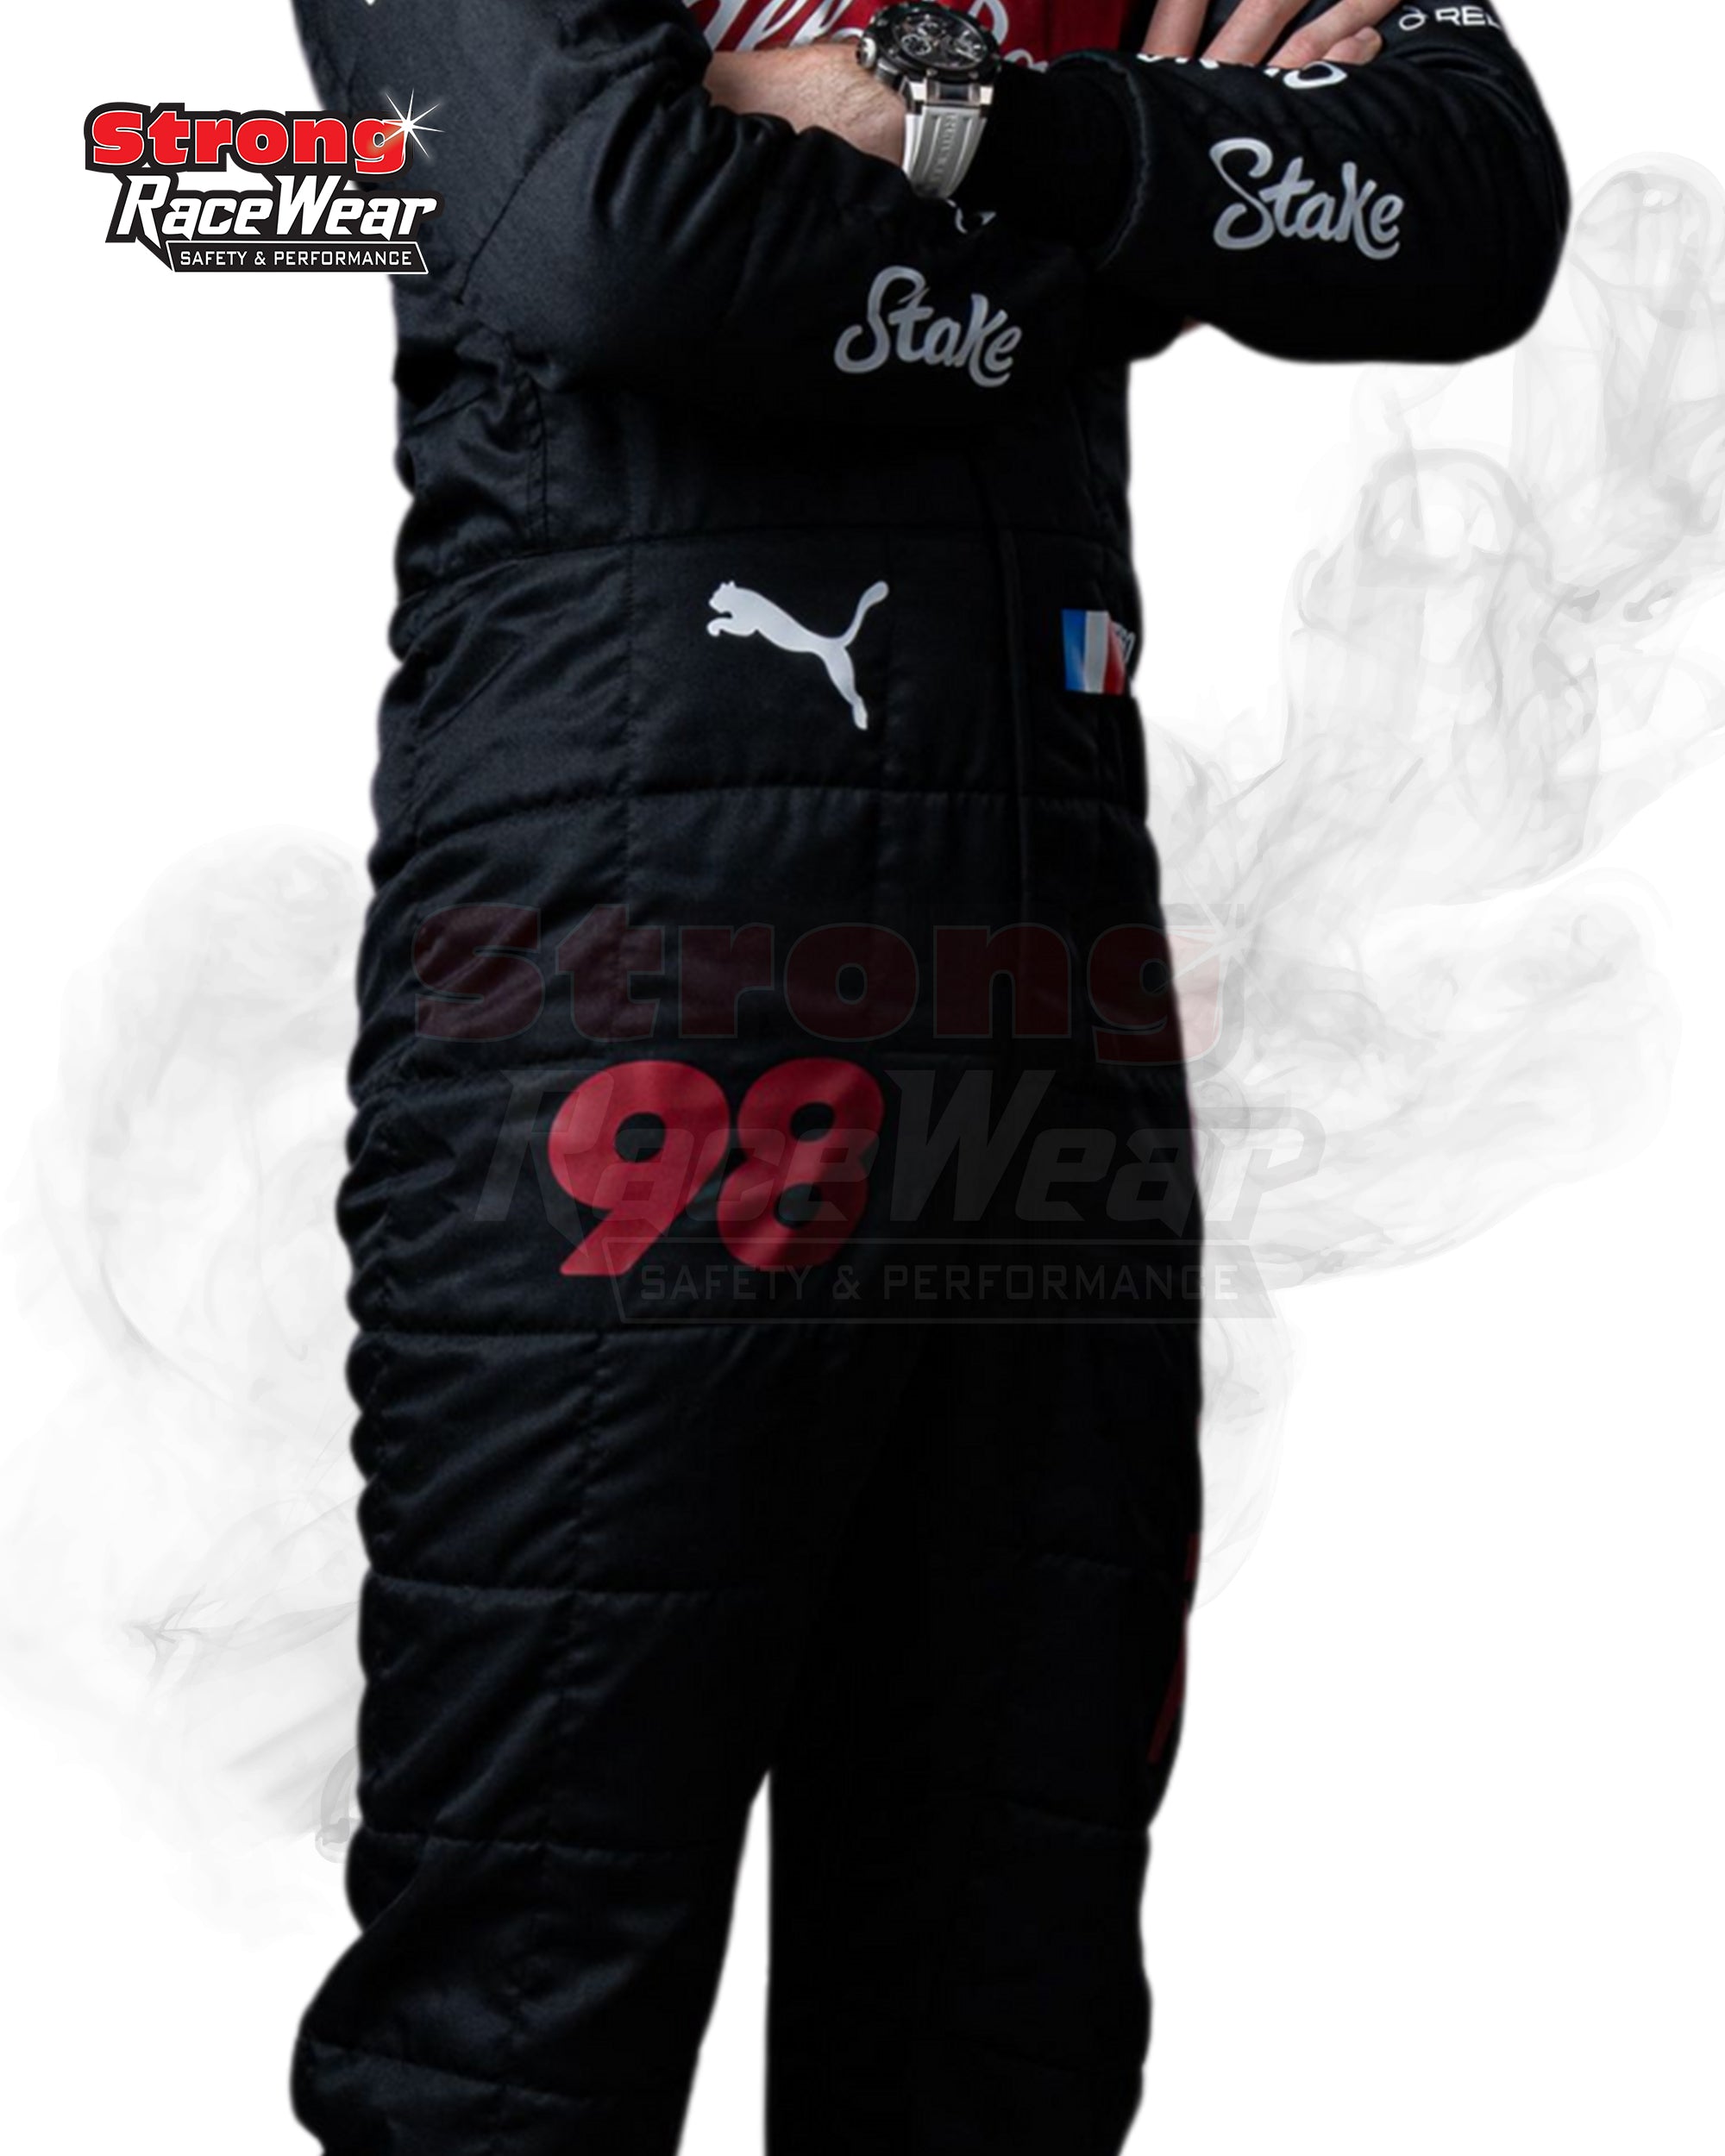  THEO POURCHAIR 2023 ALFA ROMEO F1 TEAM RACE SUIT